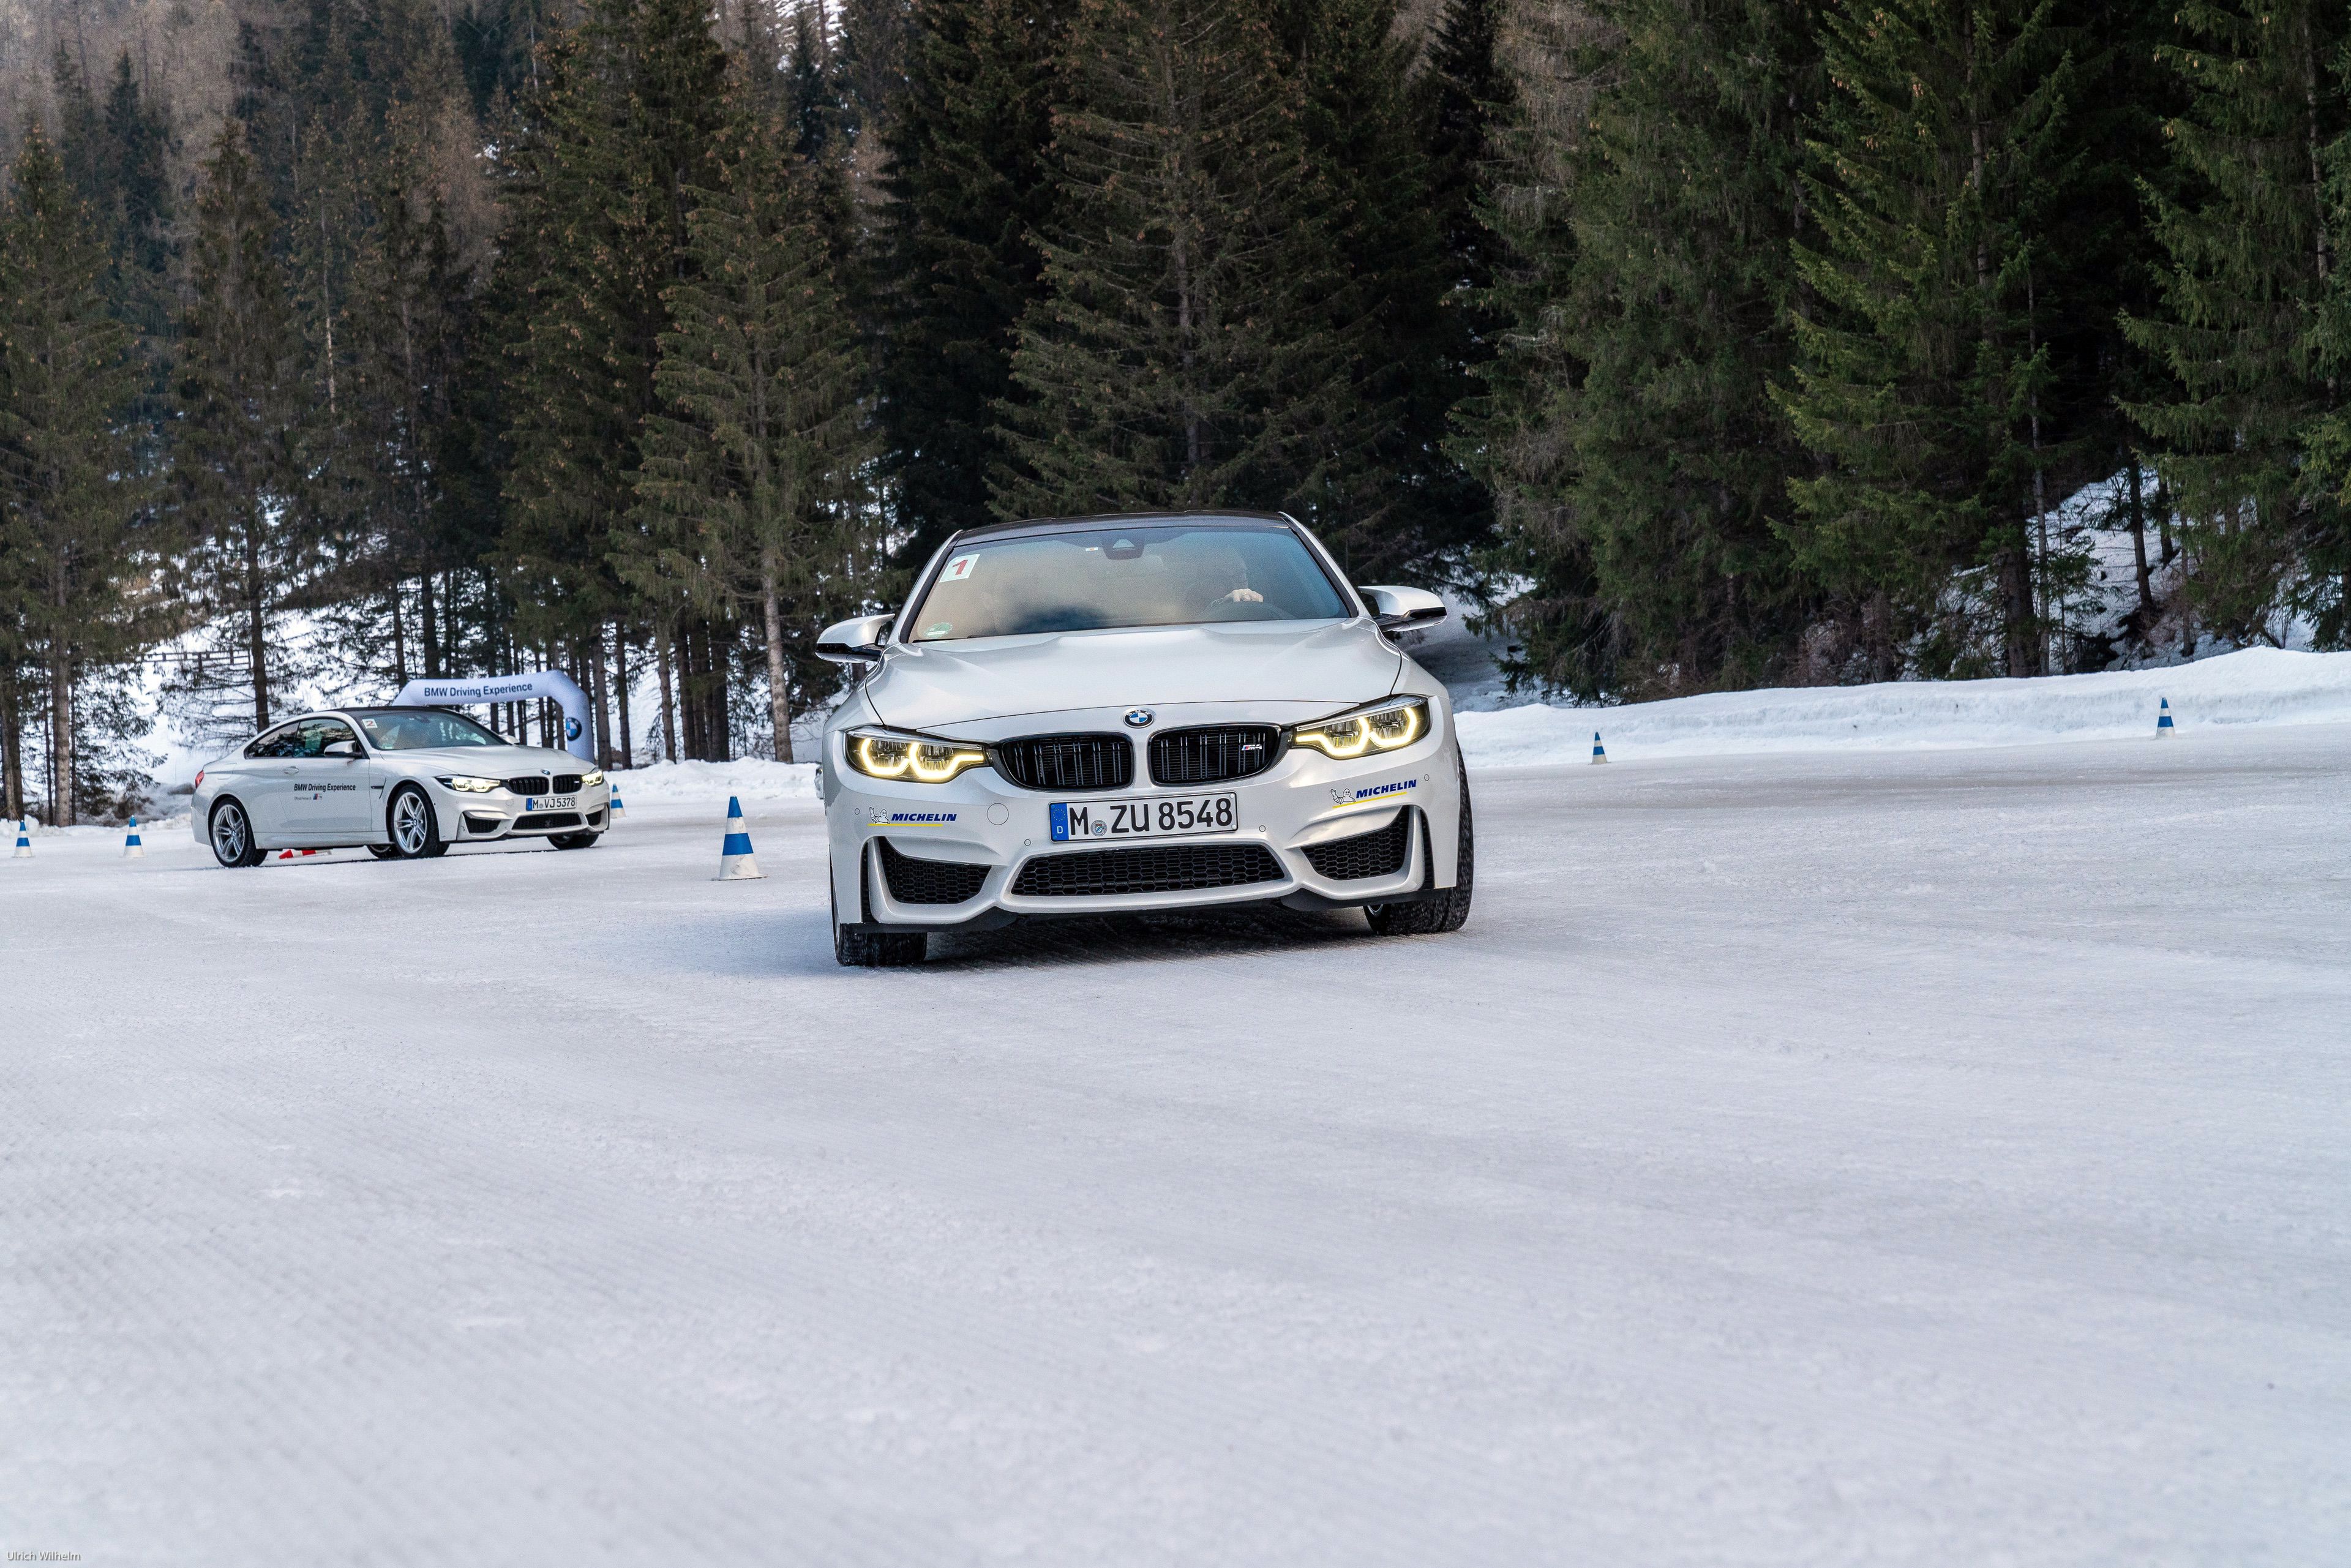 BMW 3 series in the snow white